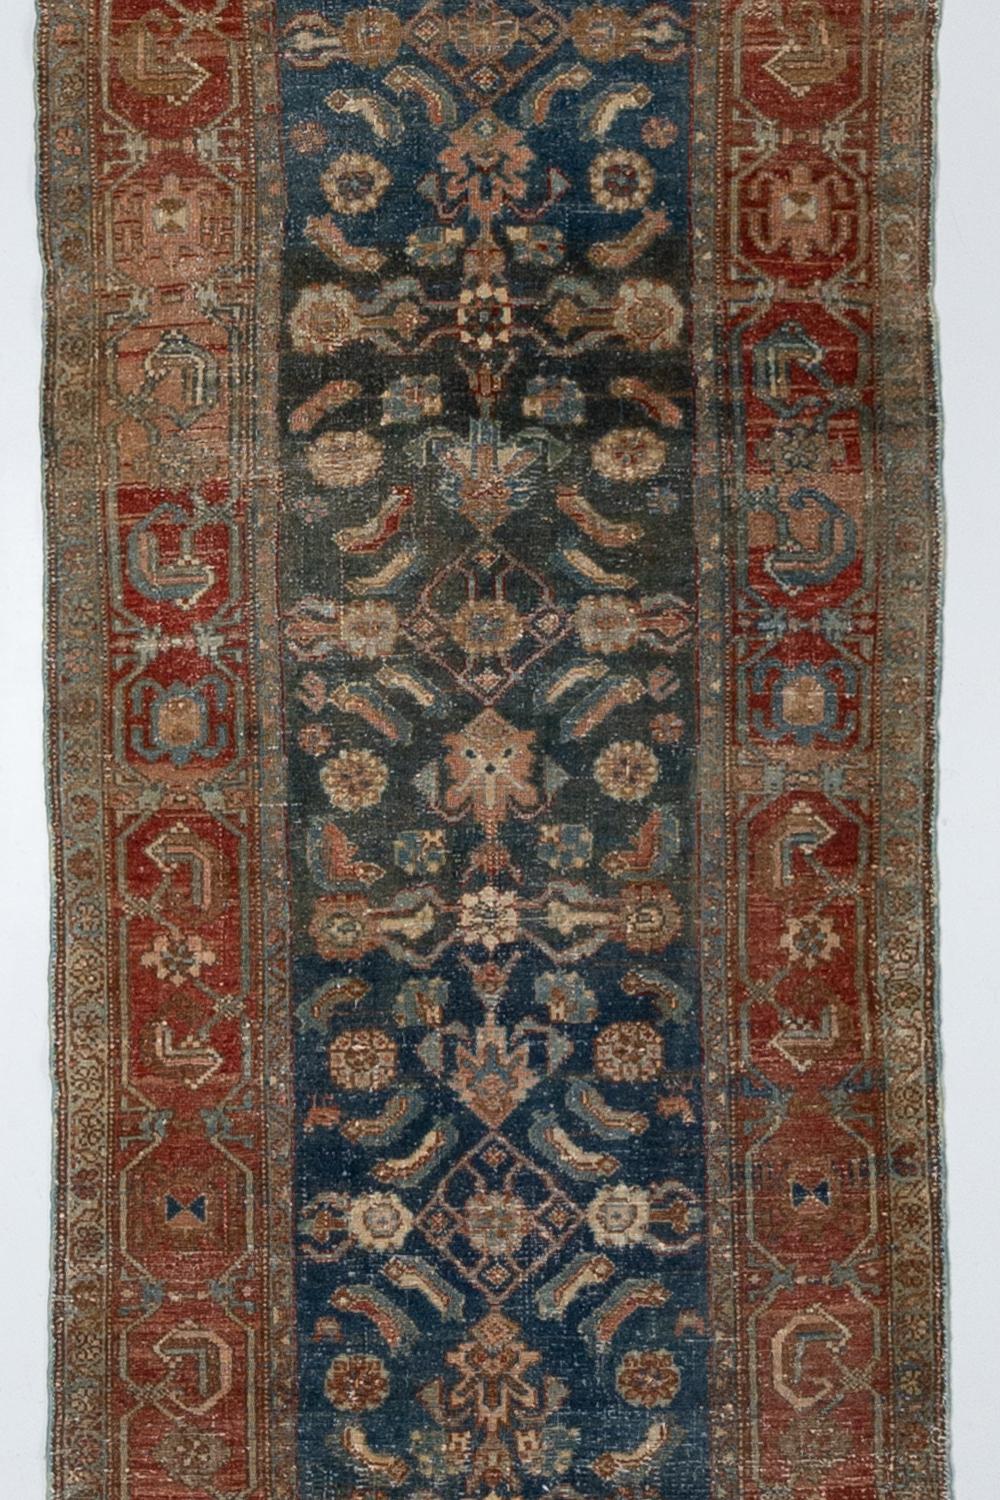 Age: 100 years.

Pile: Low

Wear notes: none

Beautiful abrash that transitions from emerald green to sapphire blue. Excellent condition. 

Wear Notes:
Vintage and antique rugs are by nature, pre-loved and may show evidence of their past.